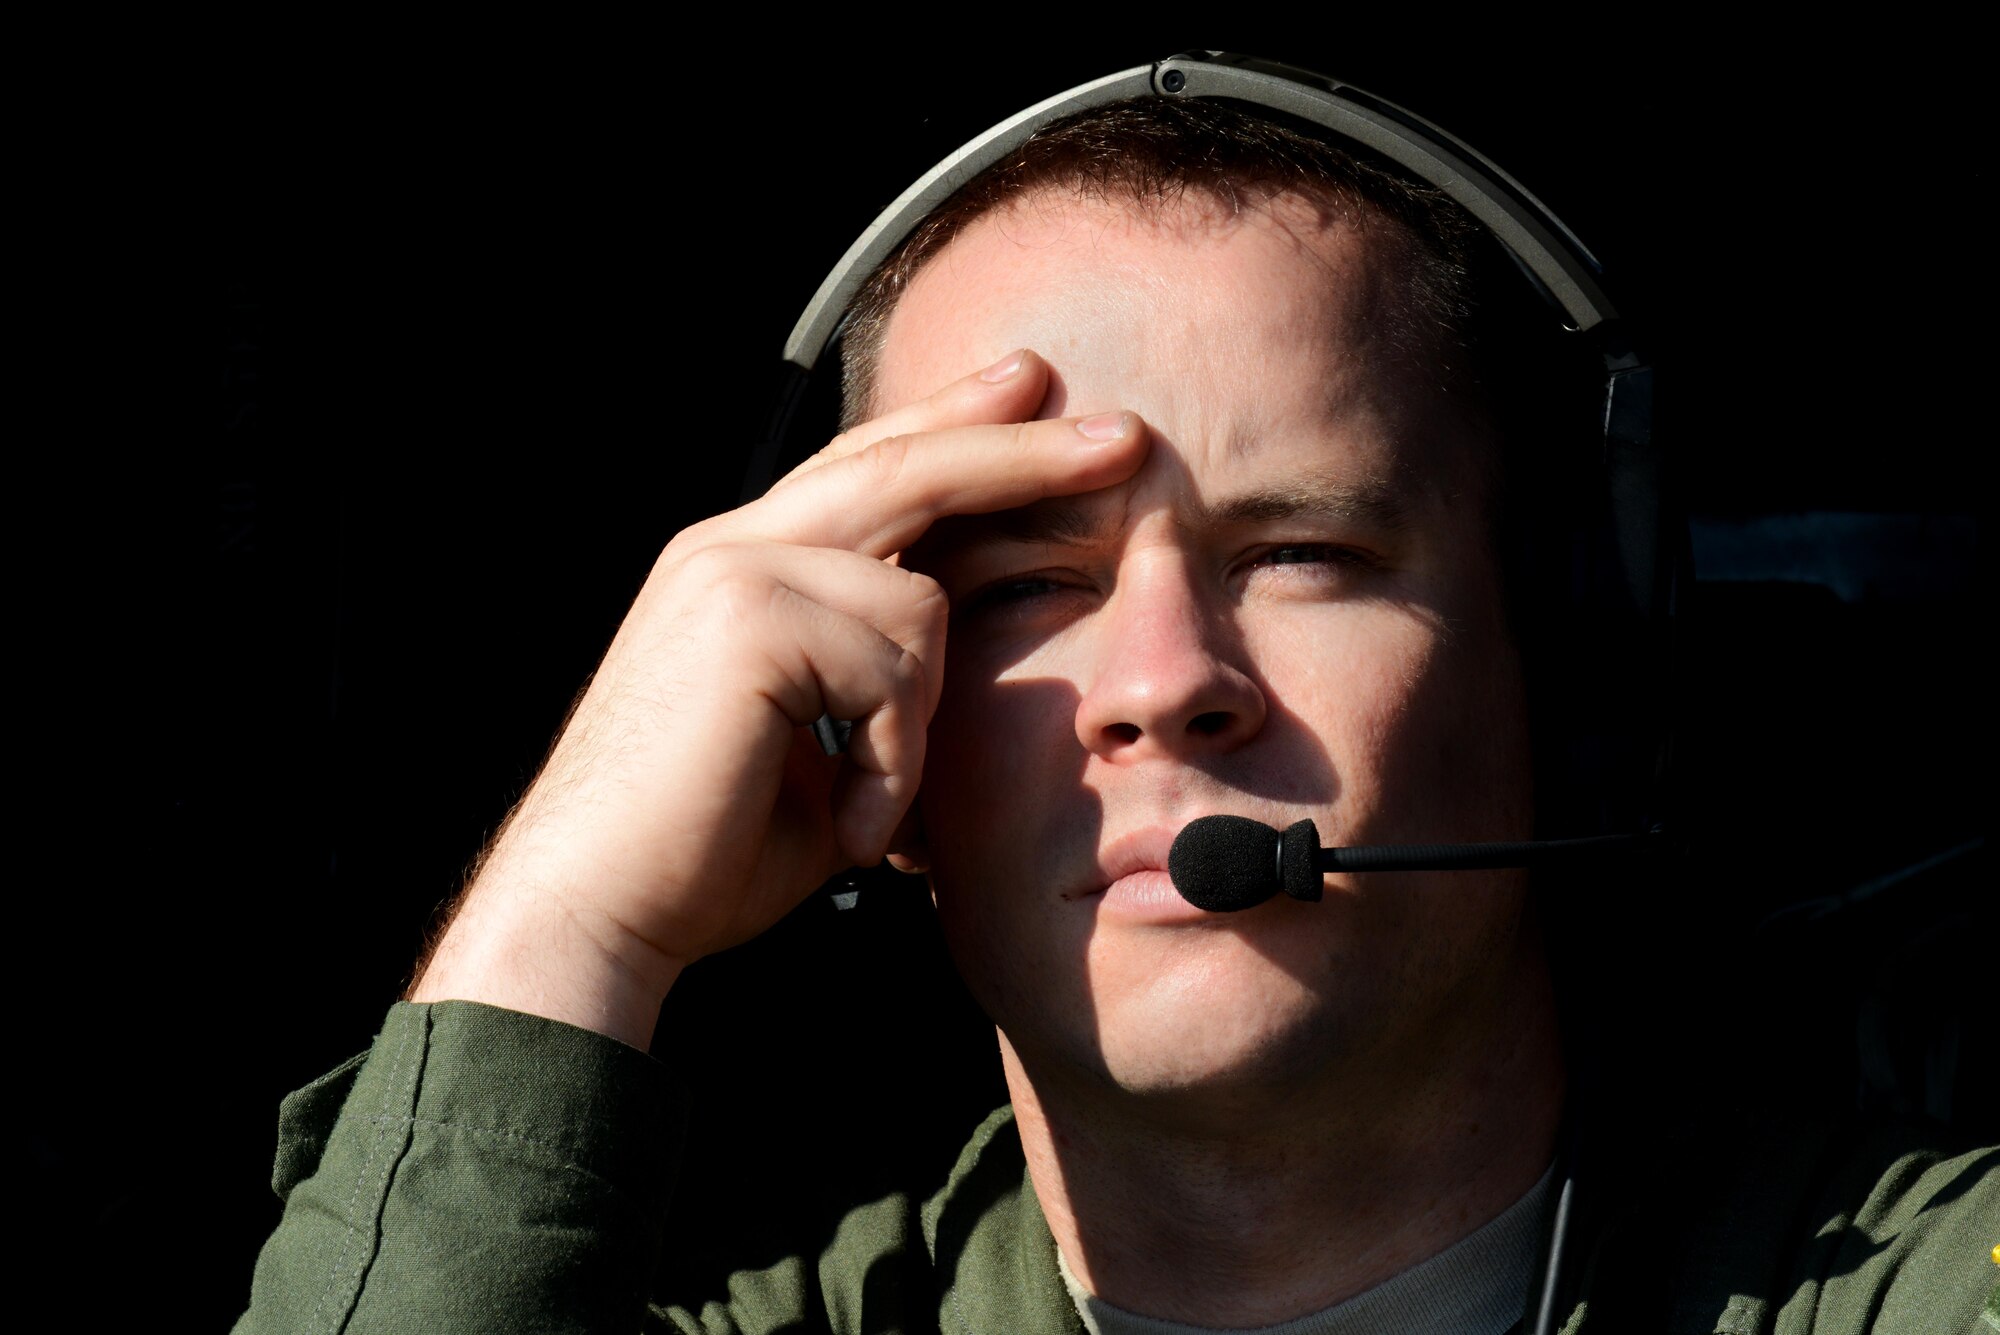 U.S. Air Force Staff Sgt. Alexander Carlson, 37th Airlift Squadron loadmaster, waits for rest of the aircrew in preparation for a mission during Operation Atlantic Resolve on Powidz Air Base, Poland, Oct. 16, 2017. Airmen assigned to the 86th Airlift Wing participated in OAR, a NATO-led exercise, as a means to enhance interoperability and maintain regional stability. (U.S. Air Force photo by Staff Sgt. Jonathan Bass)